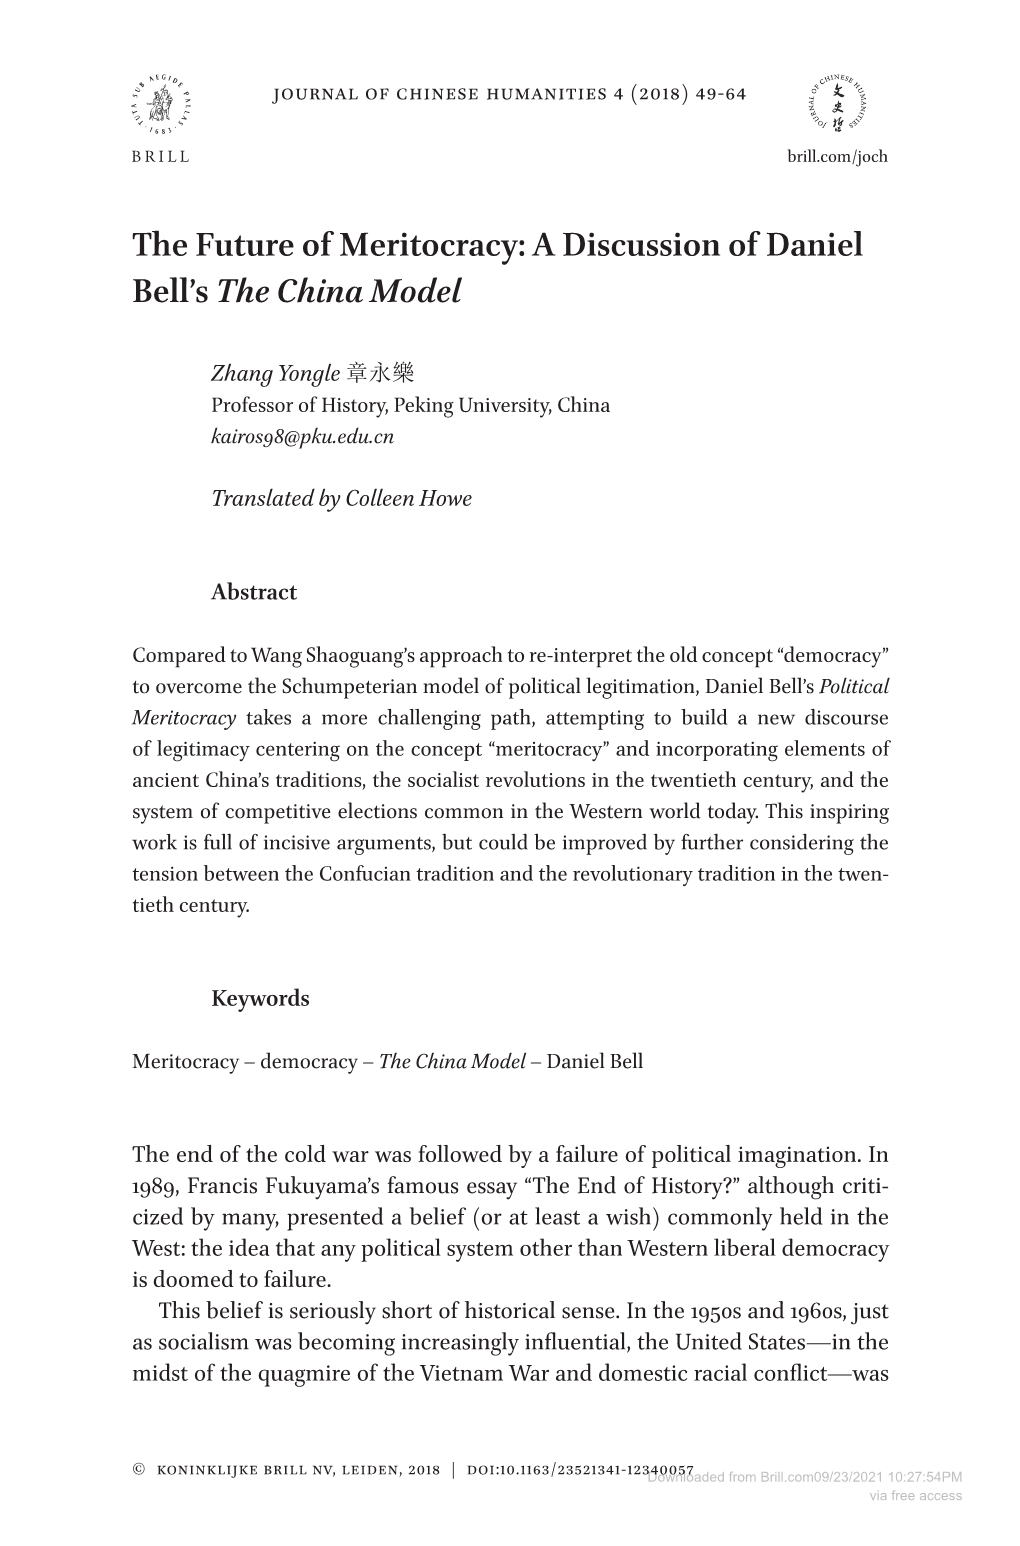 The Future of Meritocracy: a Discussion of Daniel Bell’S the China Model